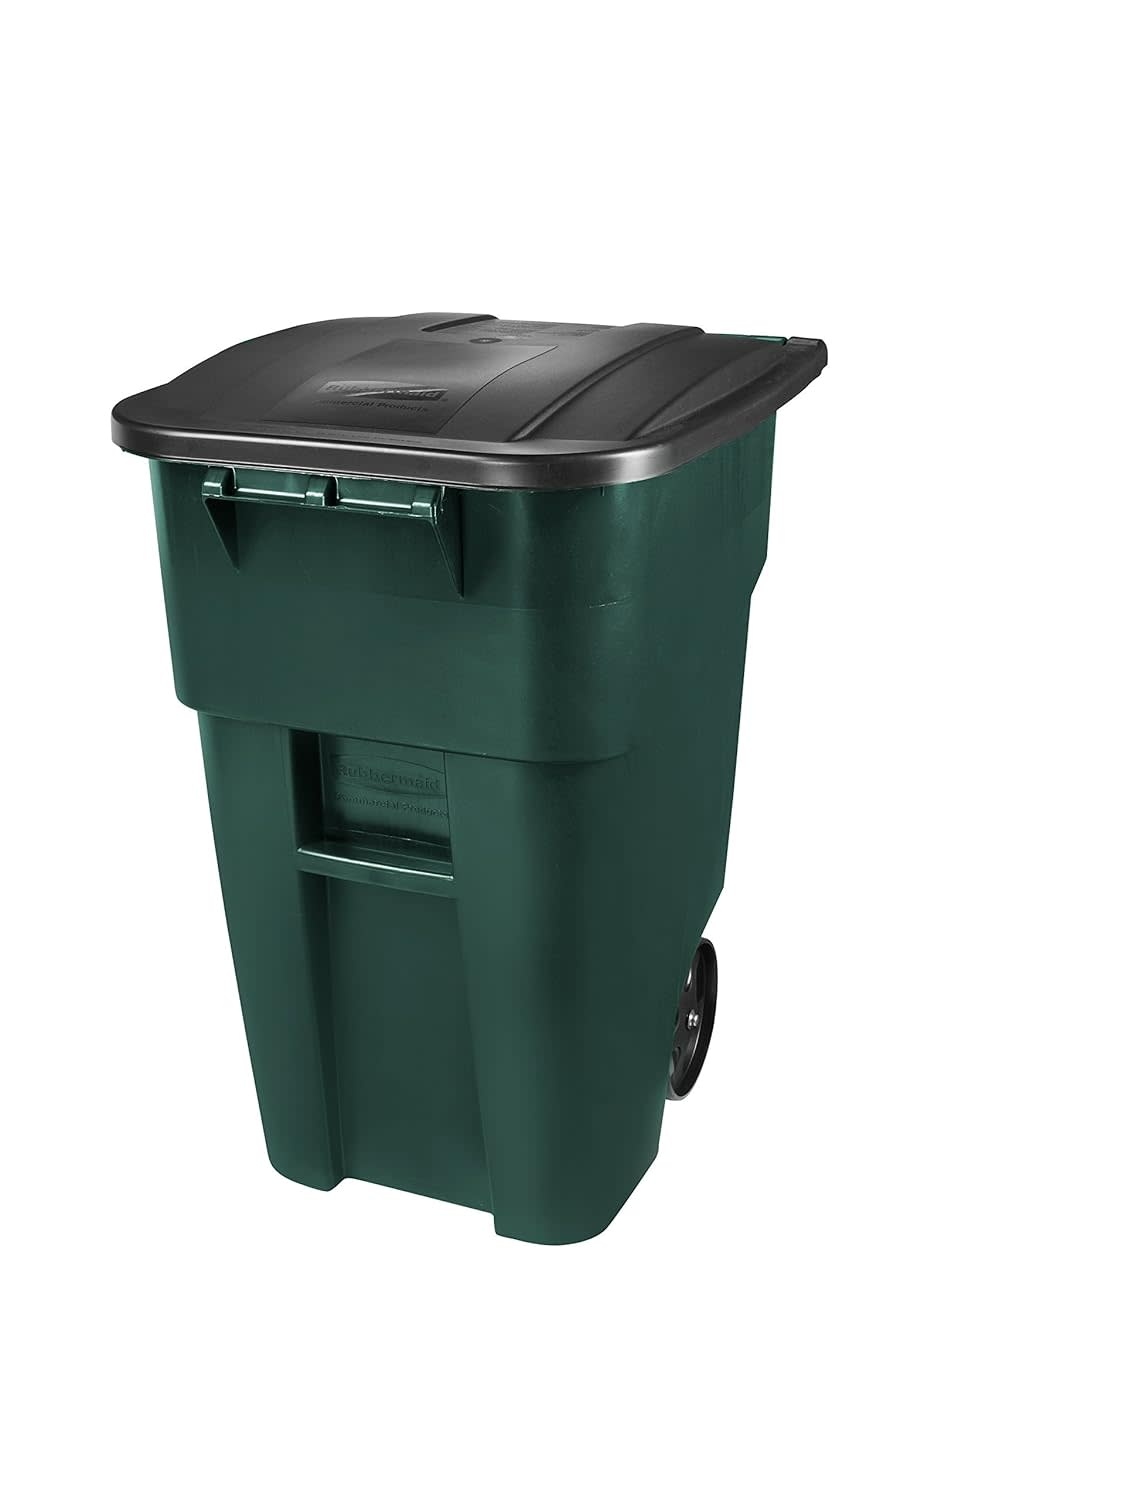 Rubbermaid Commercial Products Brute Rollout Trash/Garbage Can/Bin with  Wheels, 50 GAL, for Restaurants/Hospitals/Offices/Back of  House/Warehouses/Home, Blue (FG9W2700BLUE) - Amazing Bargains USA -  Buffalo, NY